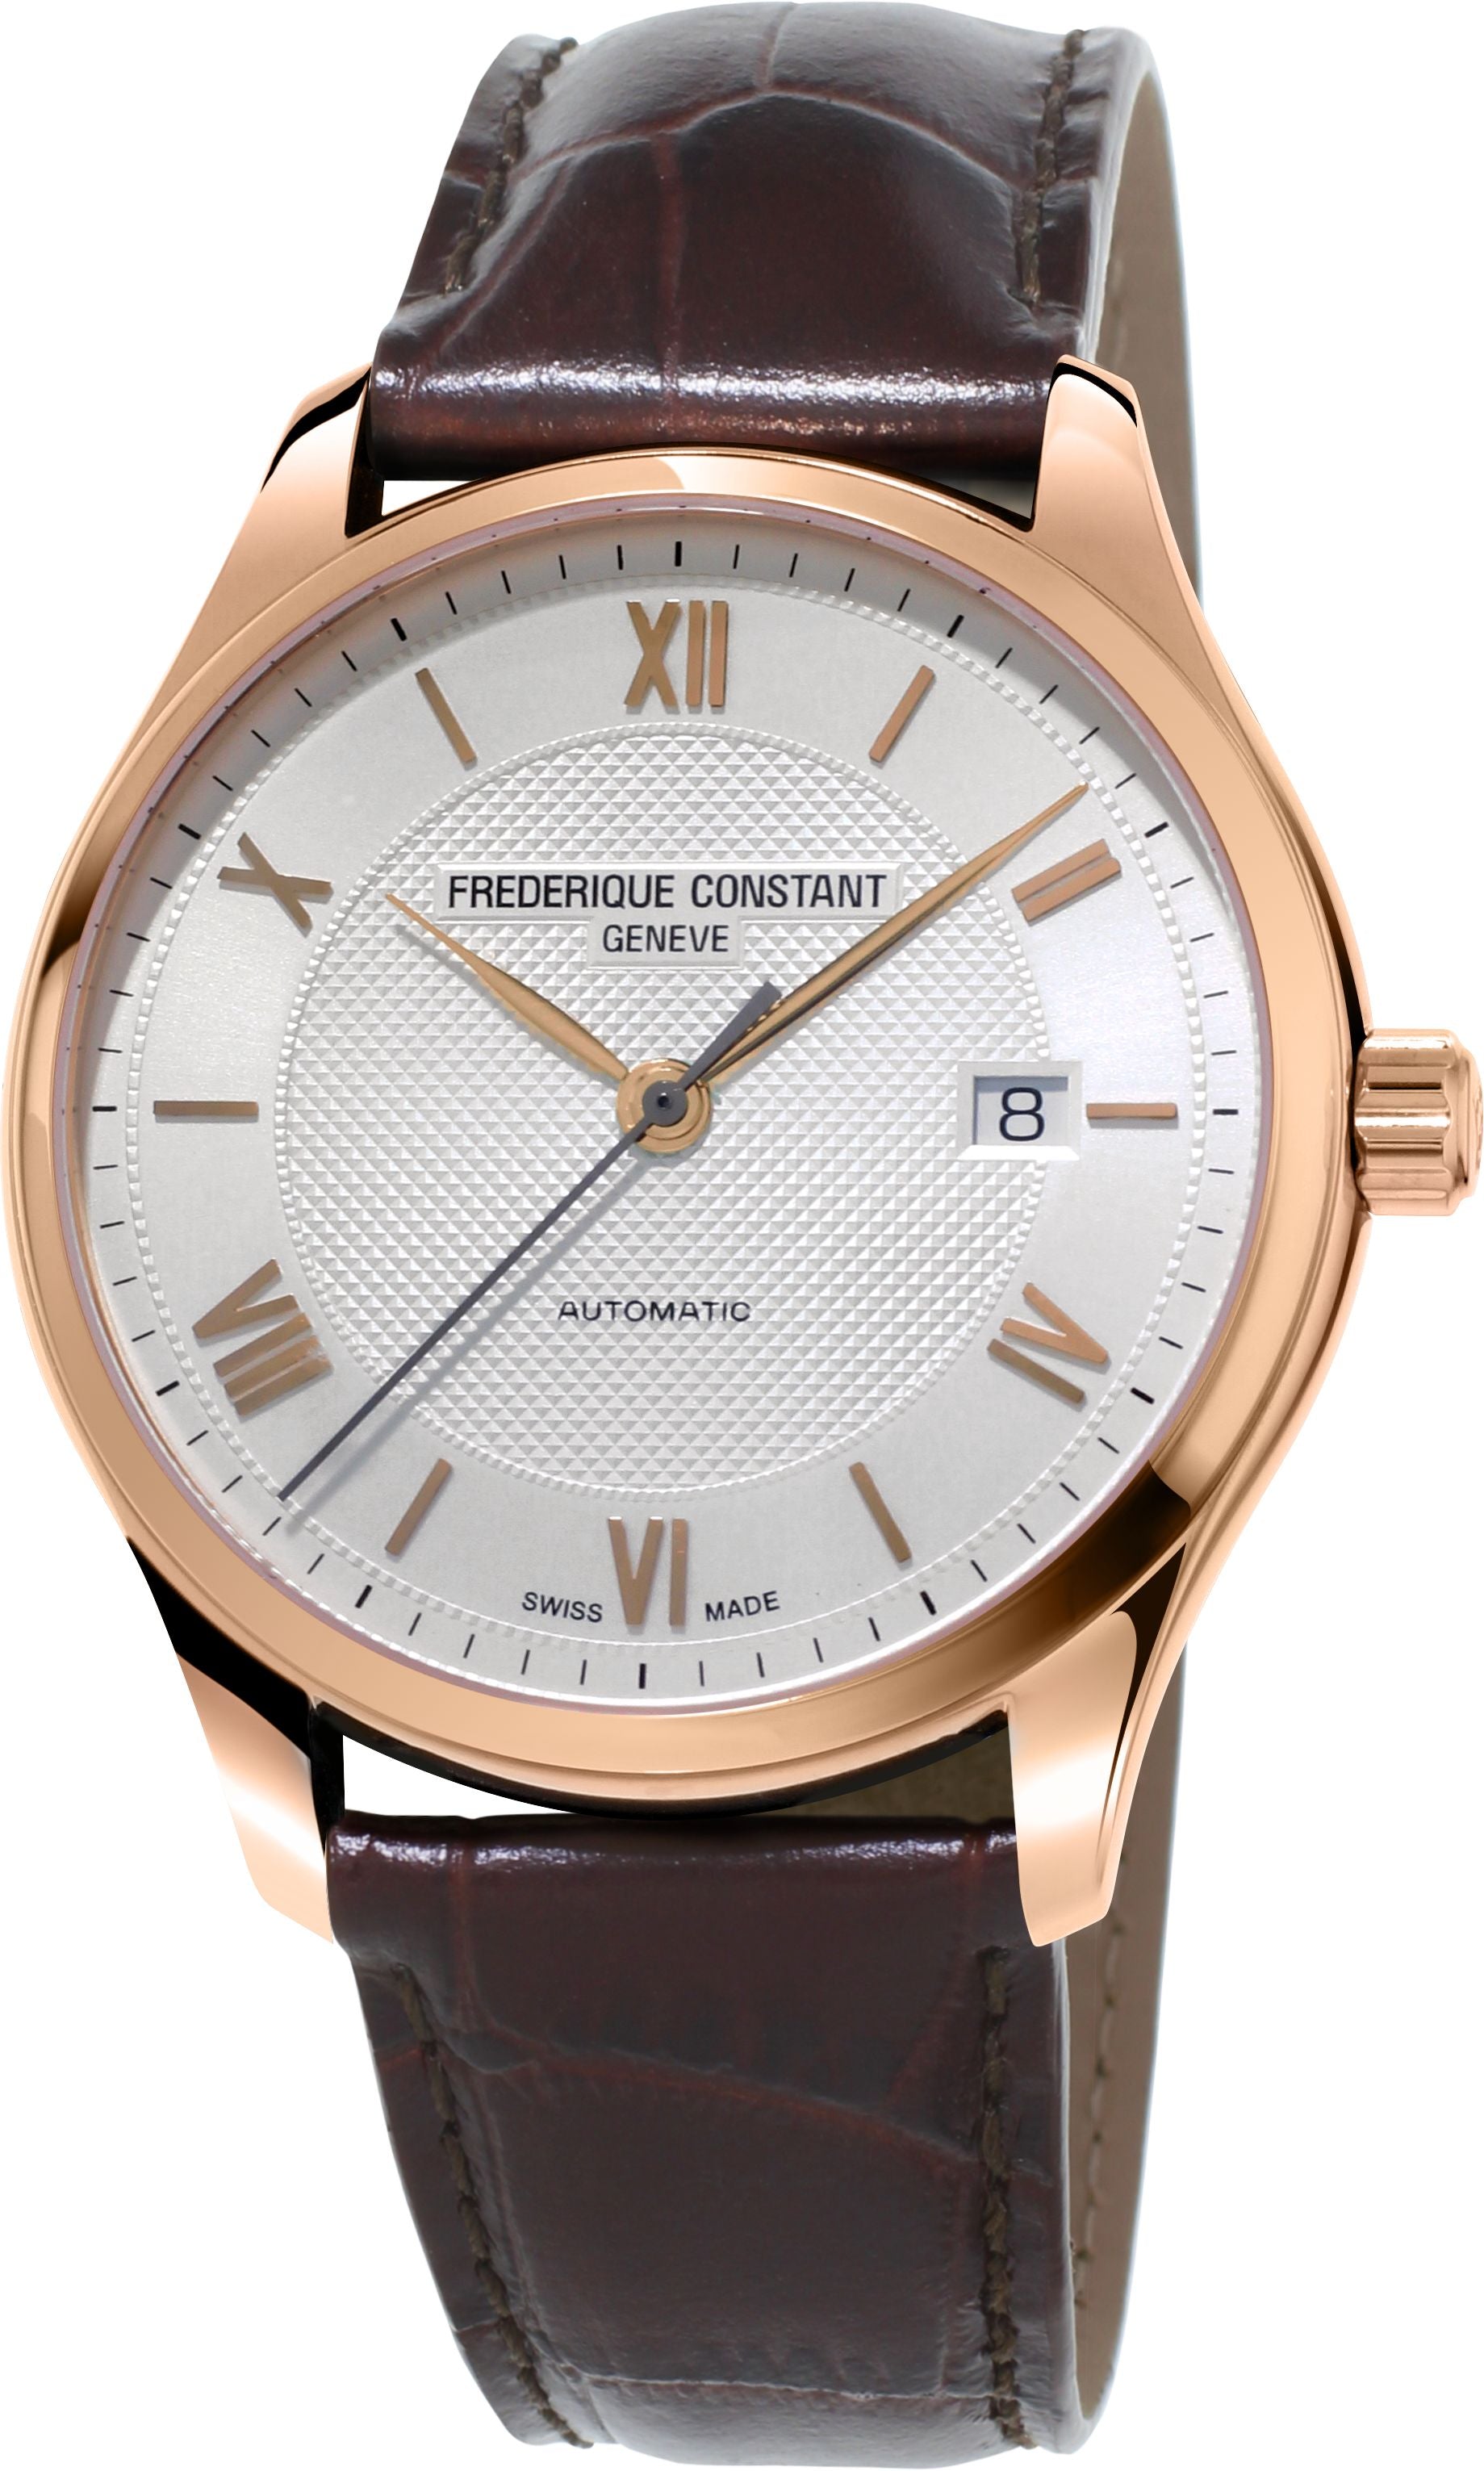 FREDERIQUE CONSTANT MENS STAINLESS STEEL Rose Gold-Tone Automatic CLASSICS Leather Strap